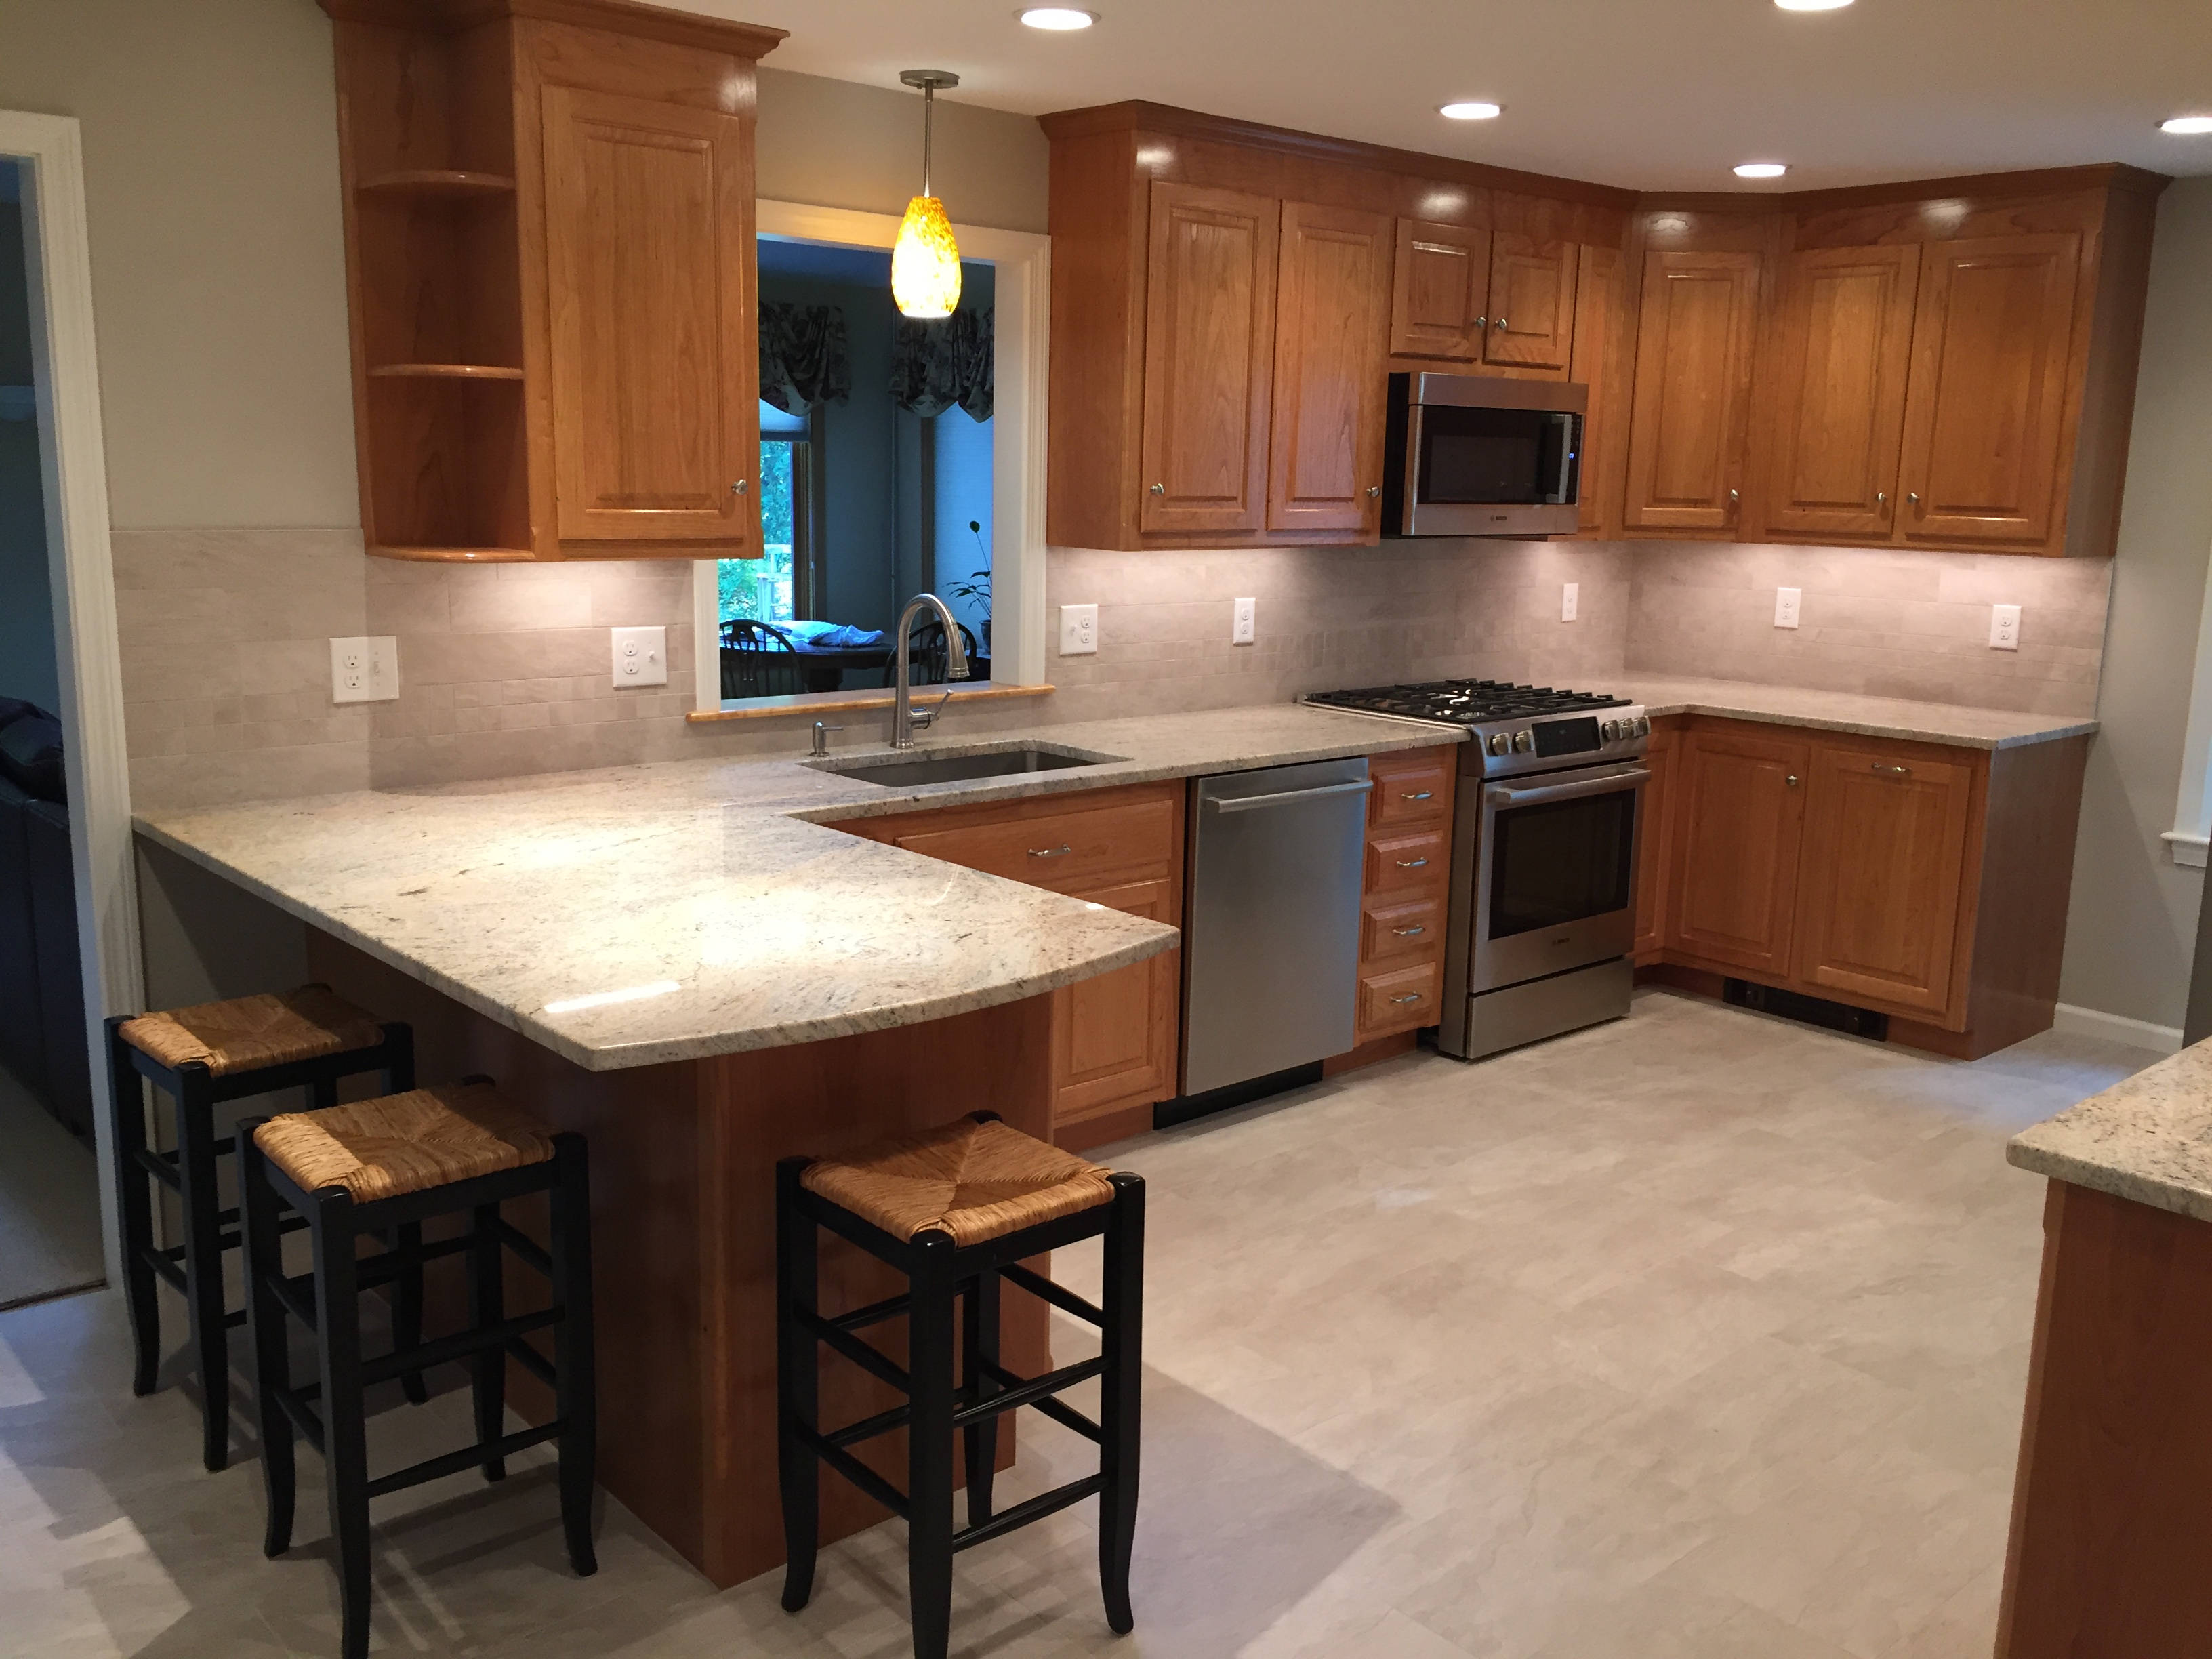 Kitchen w/ Wood Cabinets, Stainless Appliances and Granite Countertops